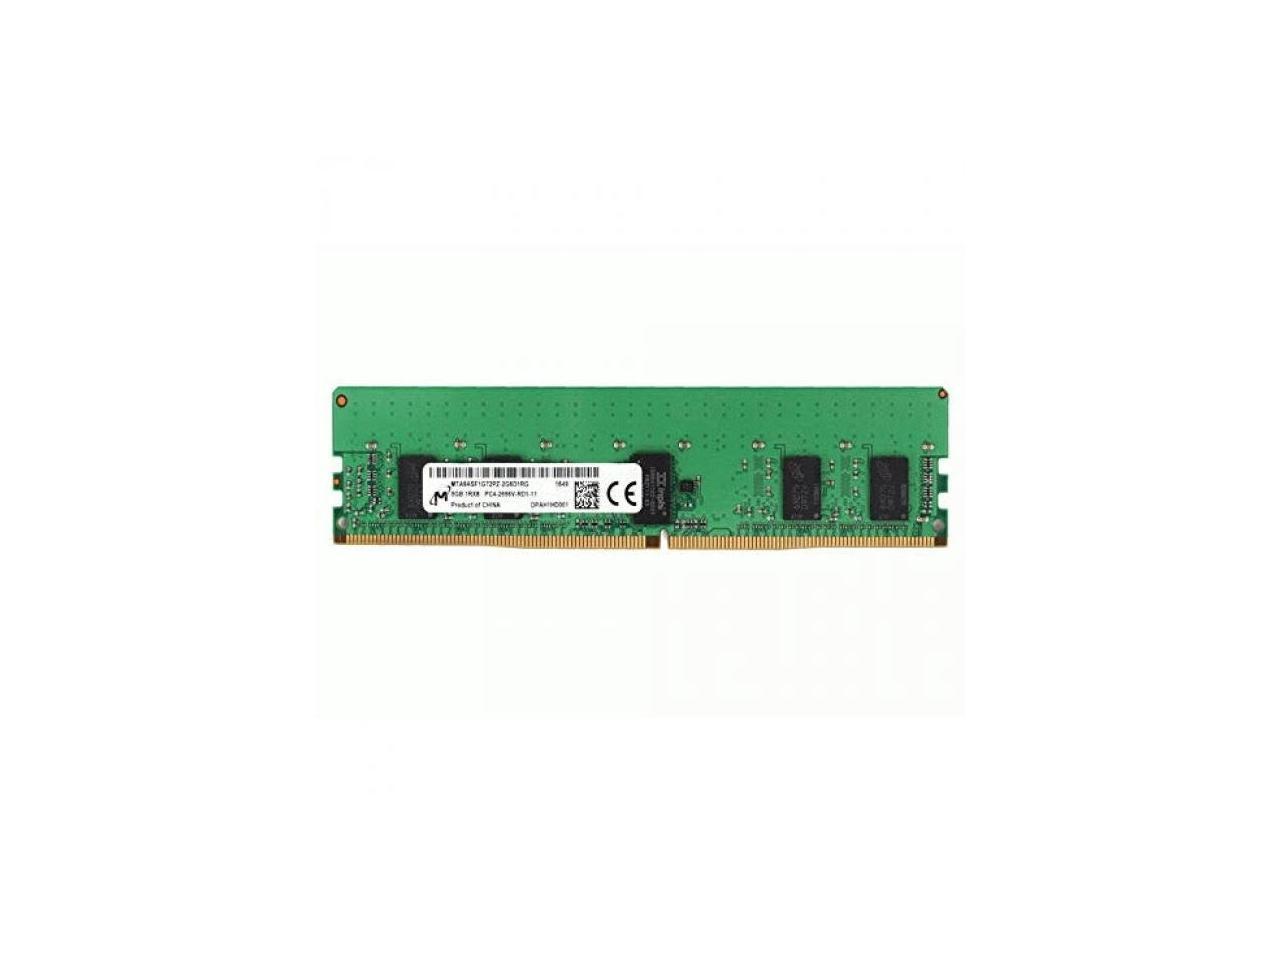 Micron 8GB DDR4 3200 Registered 288-pin DIMM 1Rx8 CL22 1.2V Memory